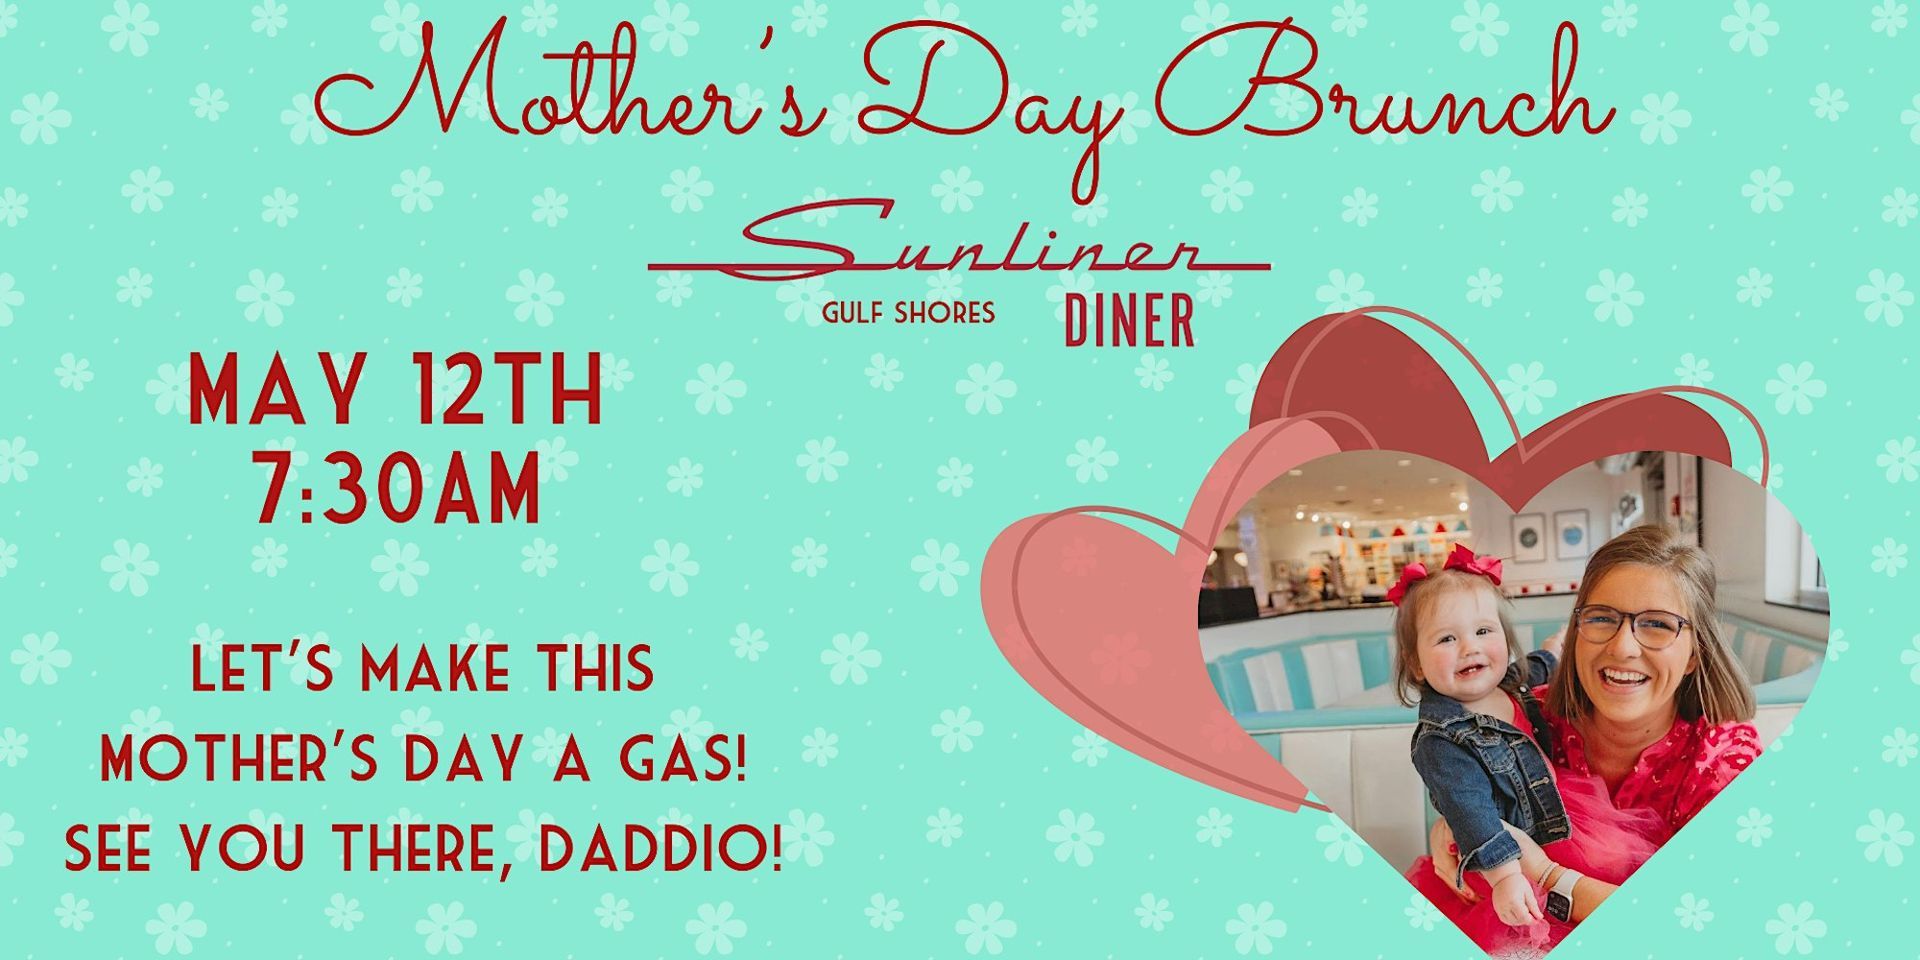 Sunliner Diner in Gulf Shores Mother's Day Specials